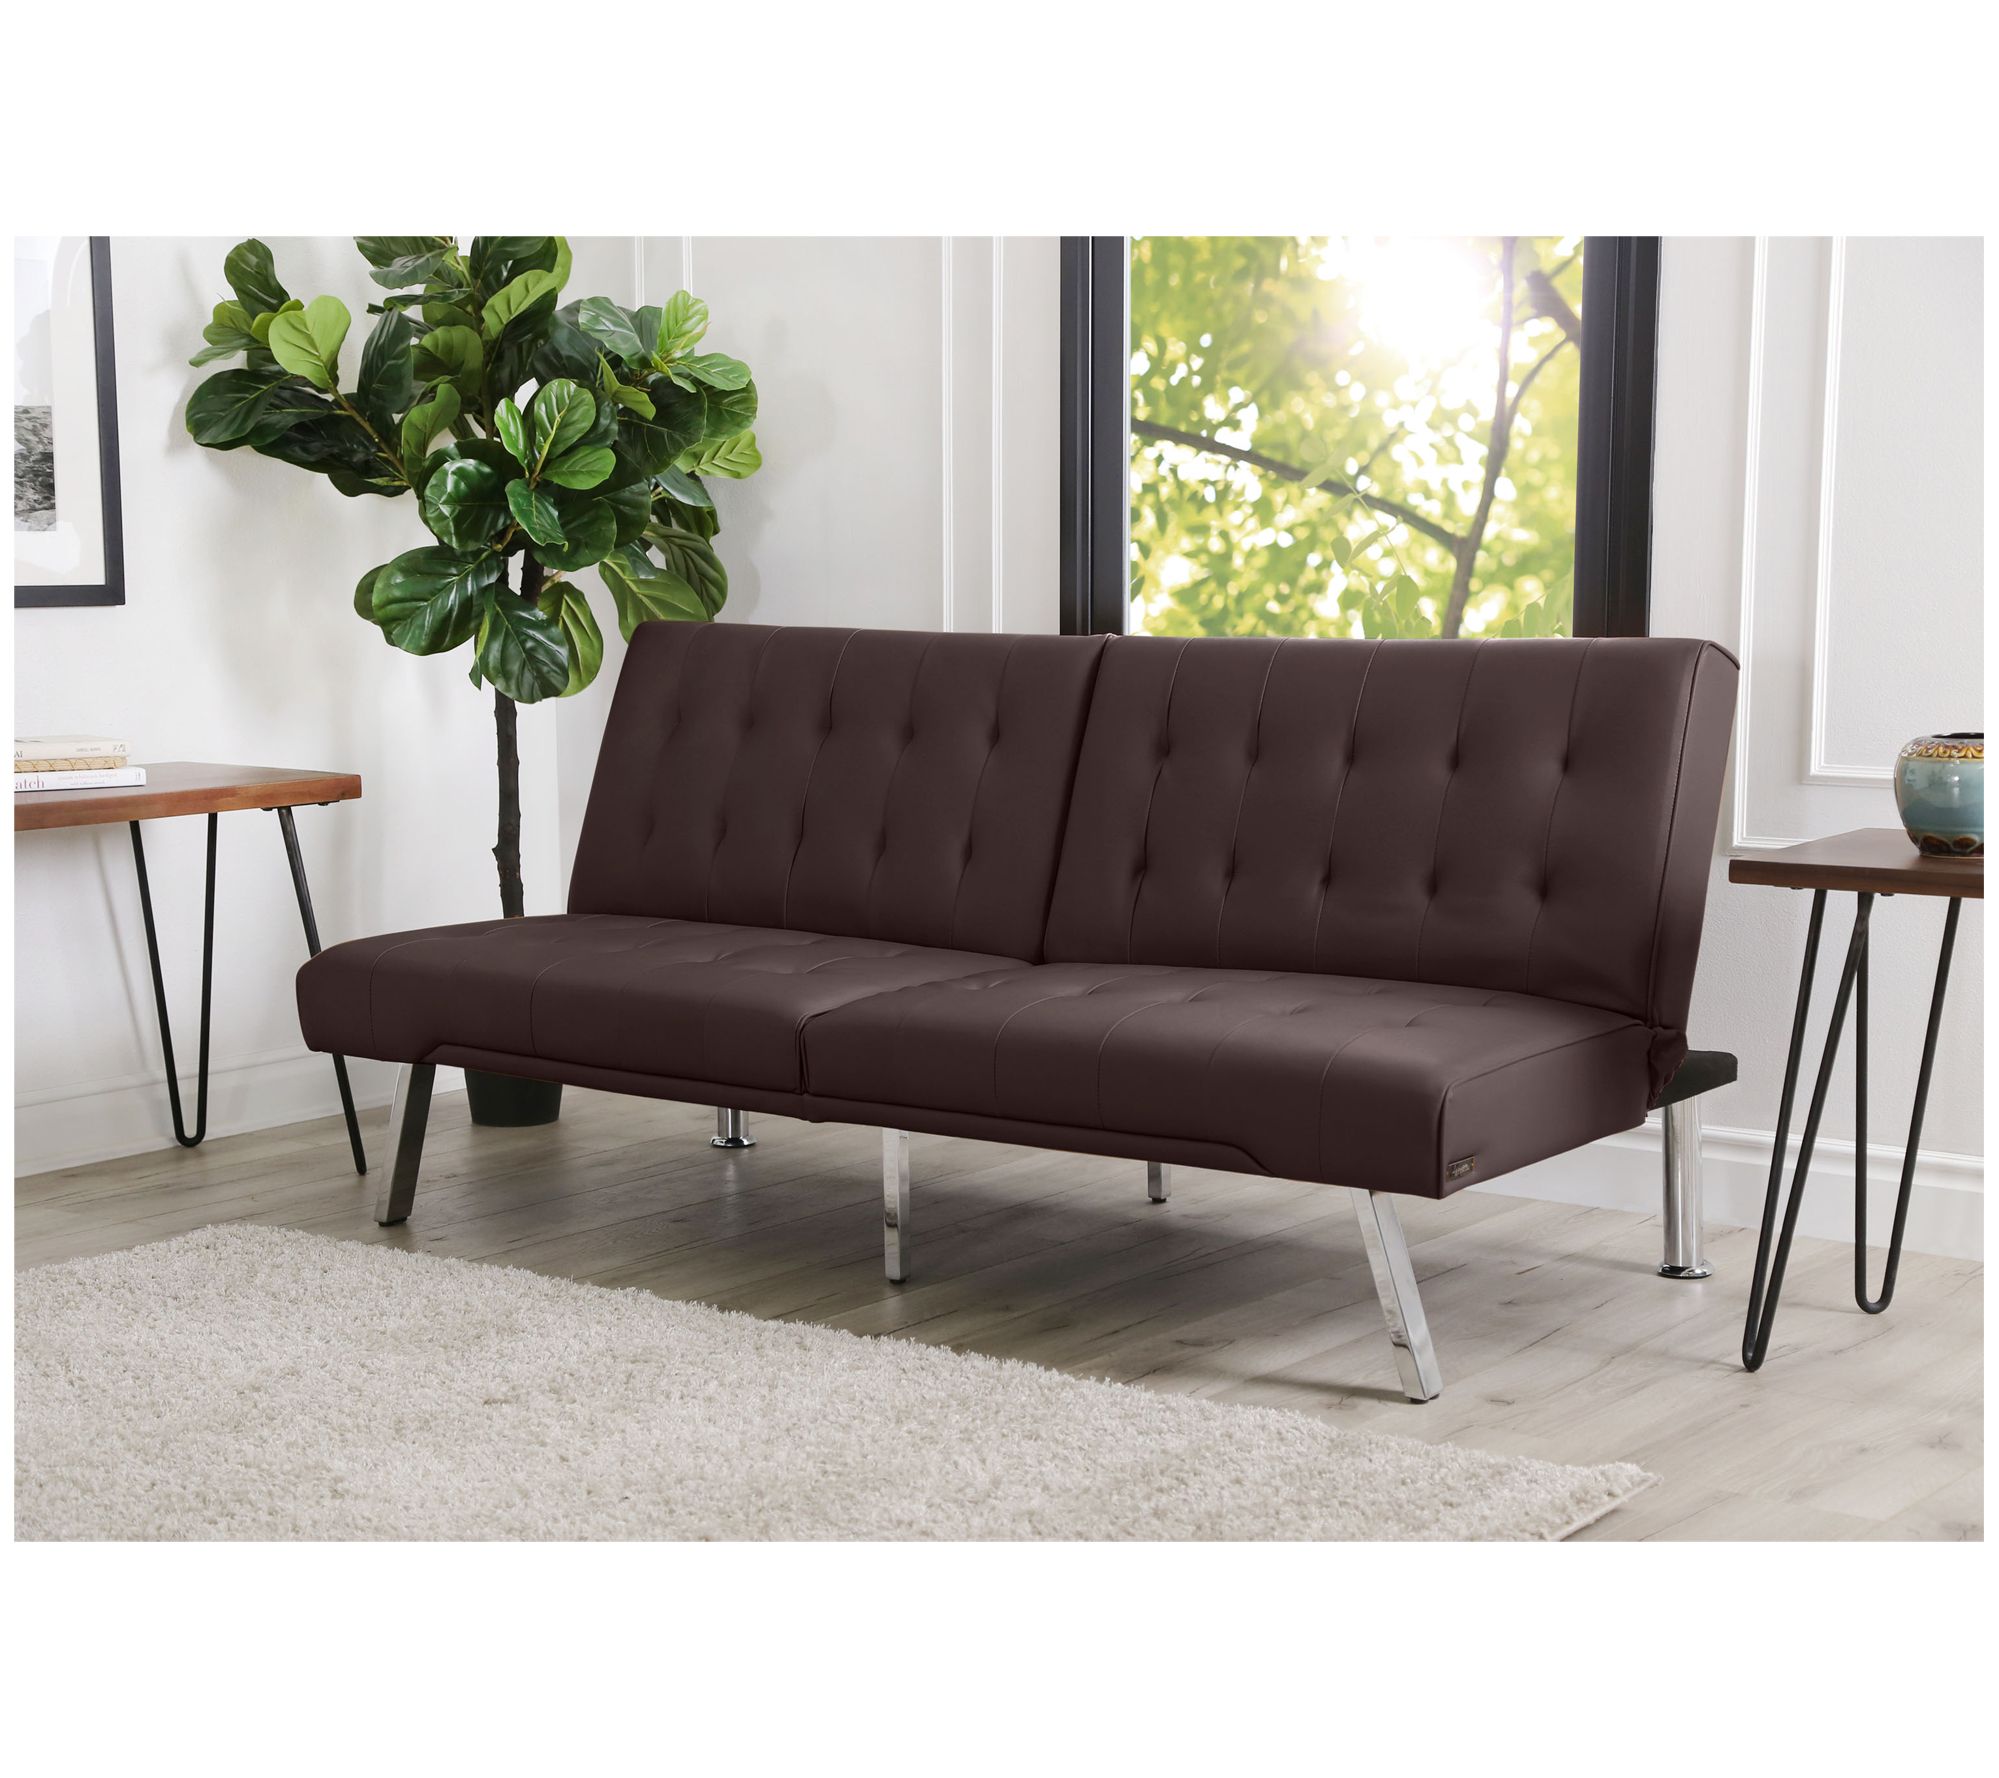 Jackson Leather Foldable Futon Sofa Bed by Abbyson Living